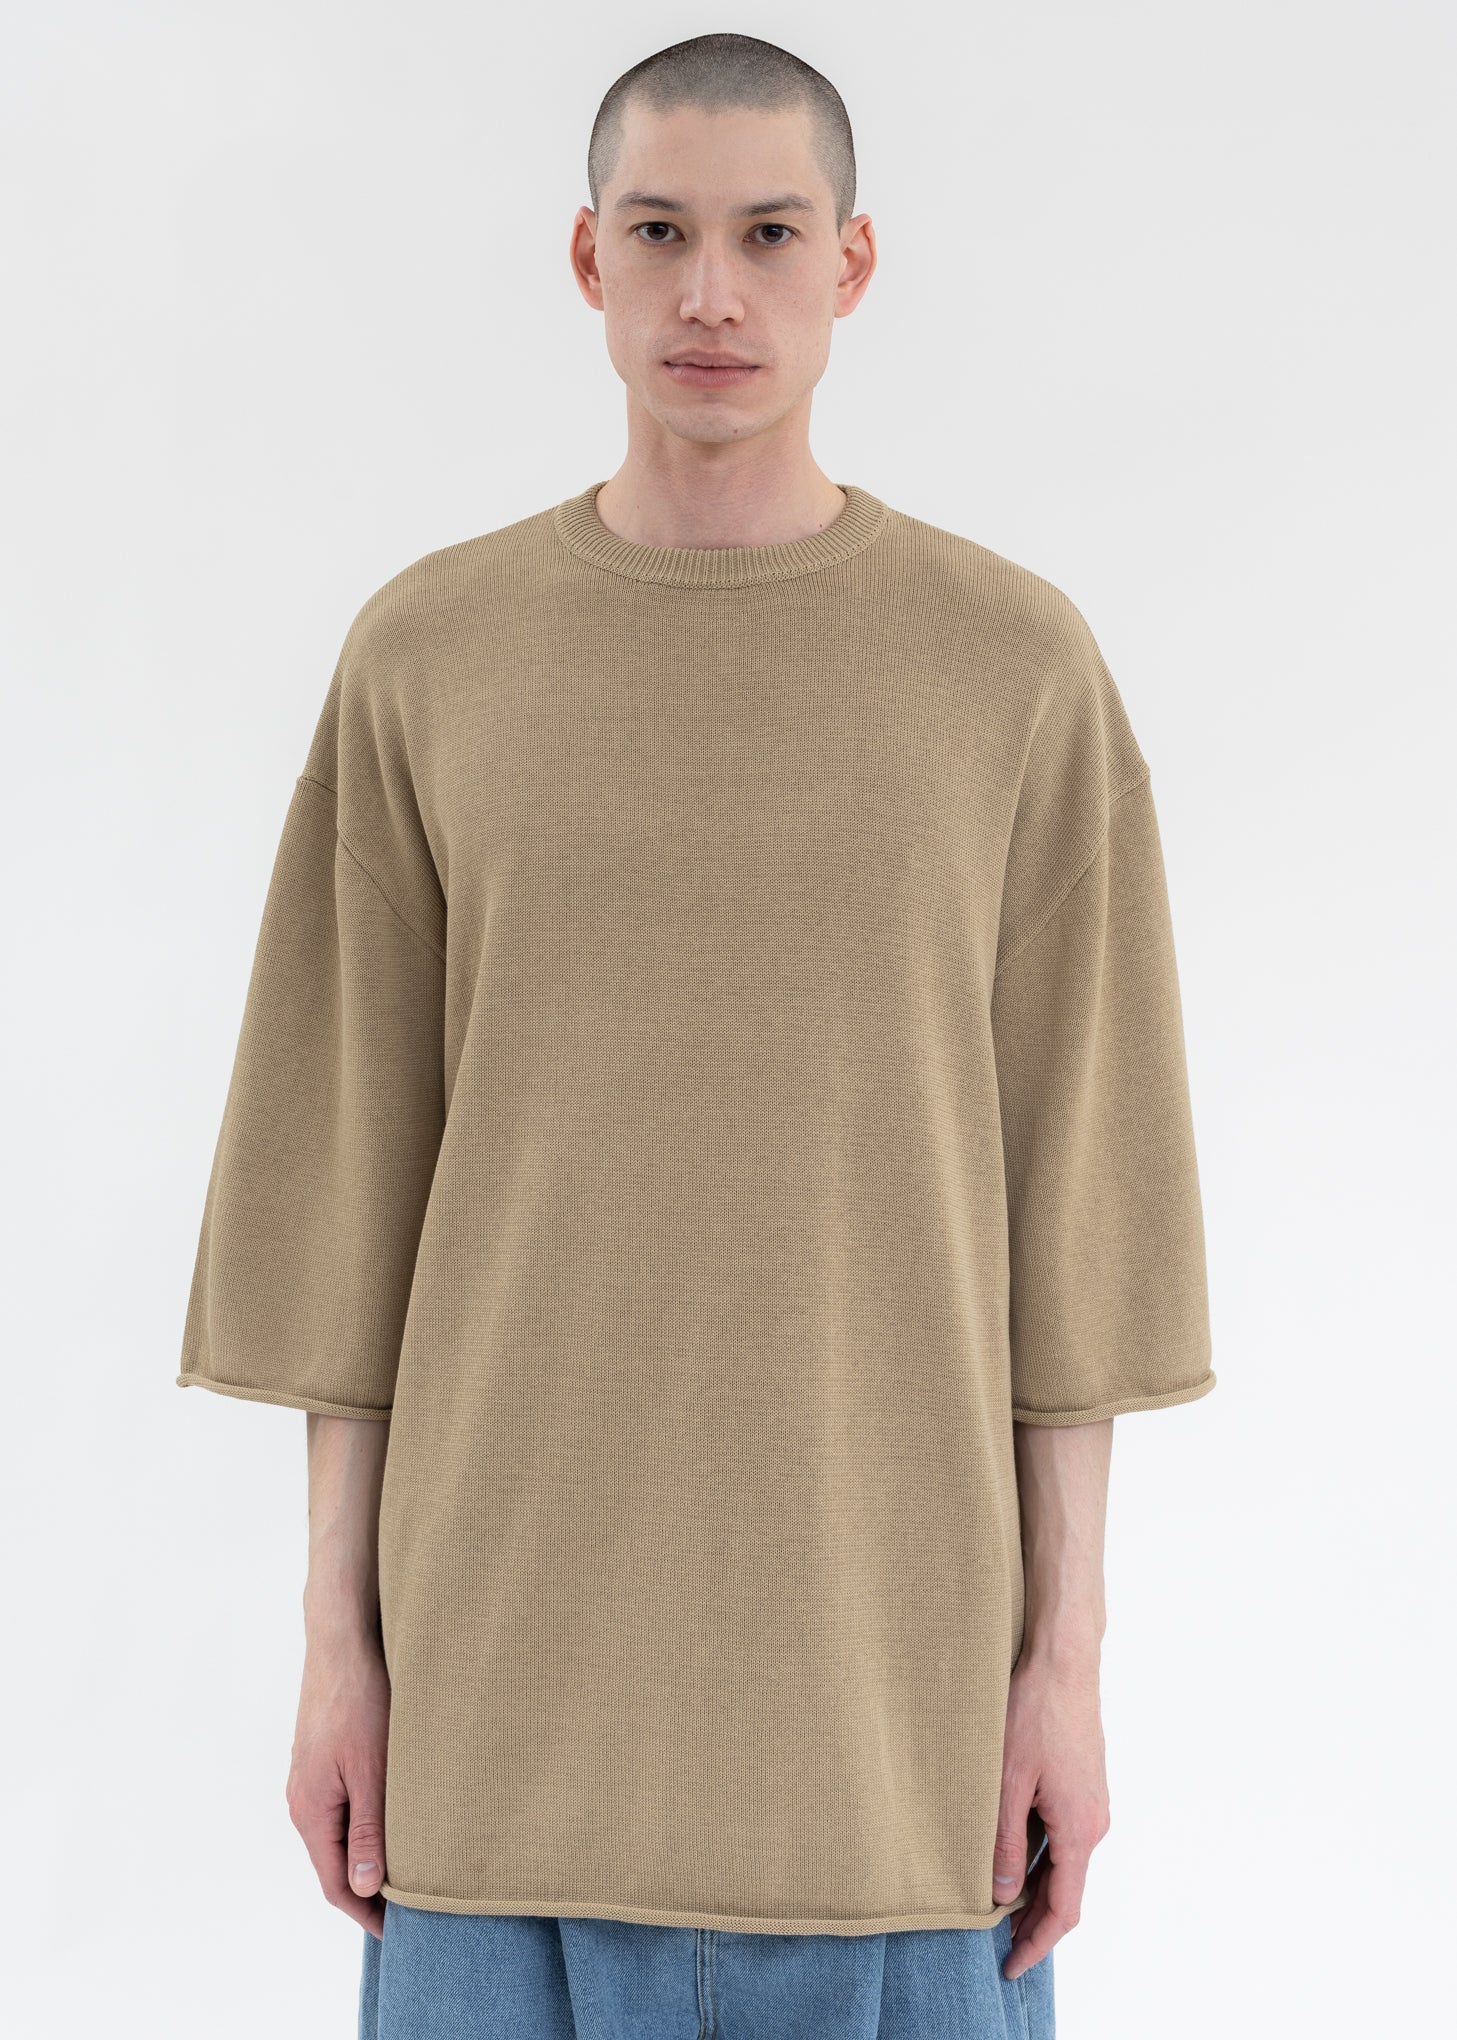 BEIGE KNITTED FELTED T-SHIRT